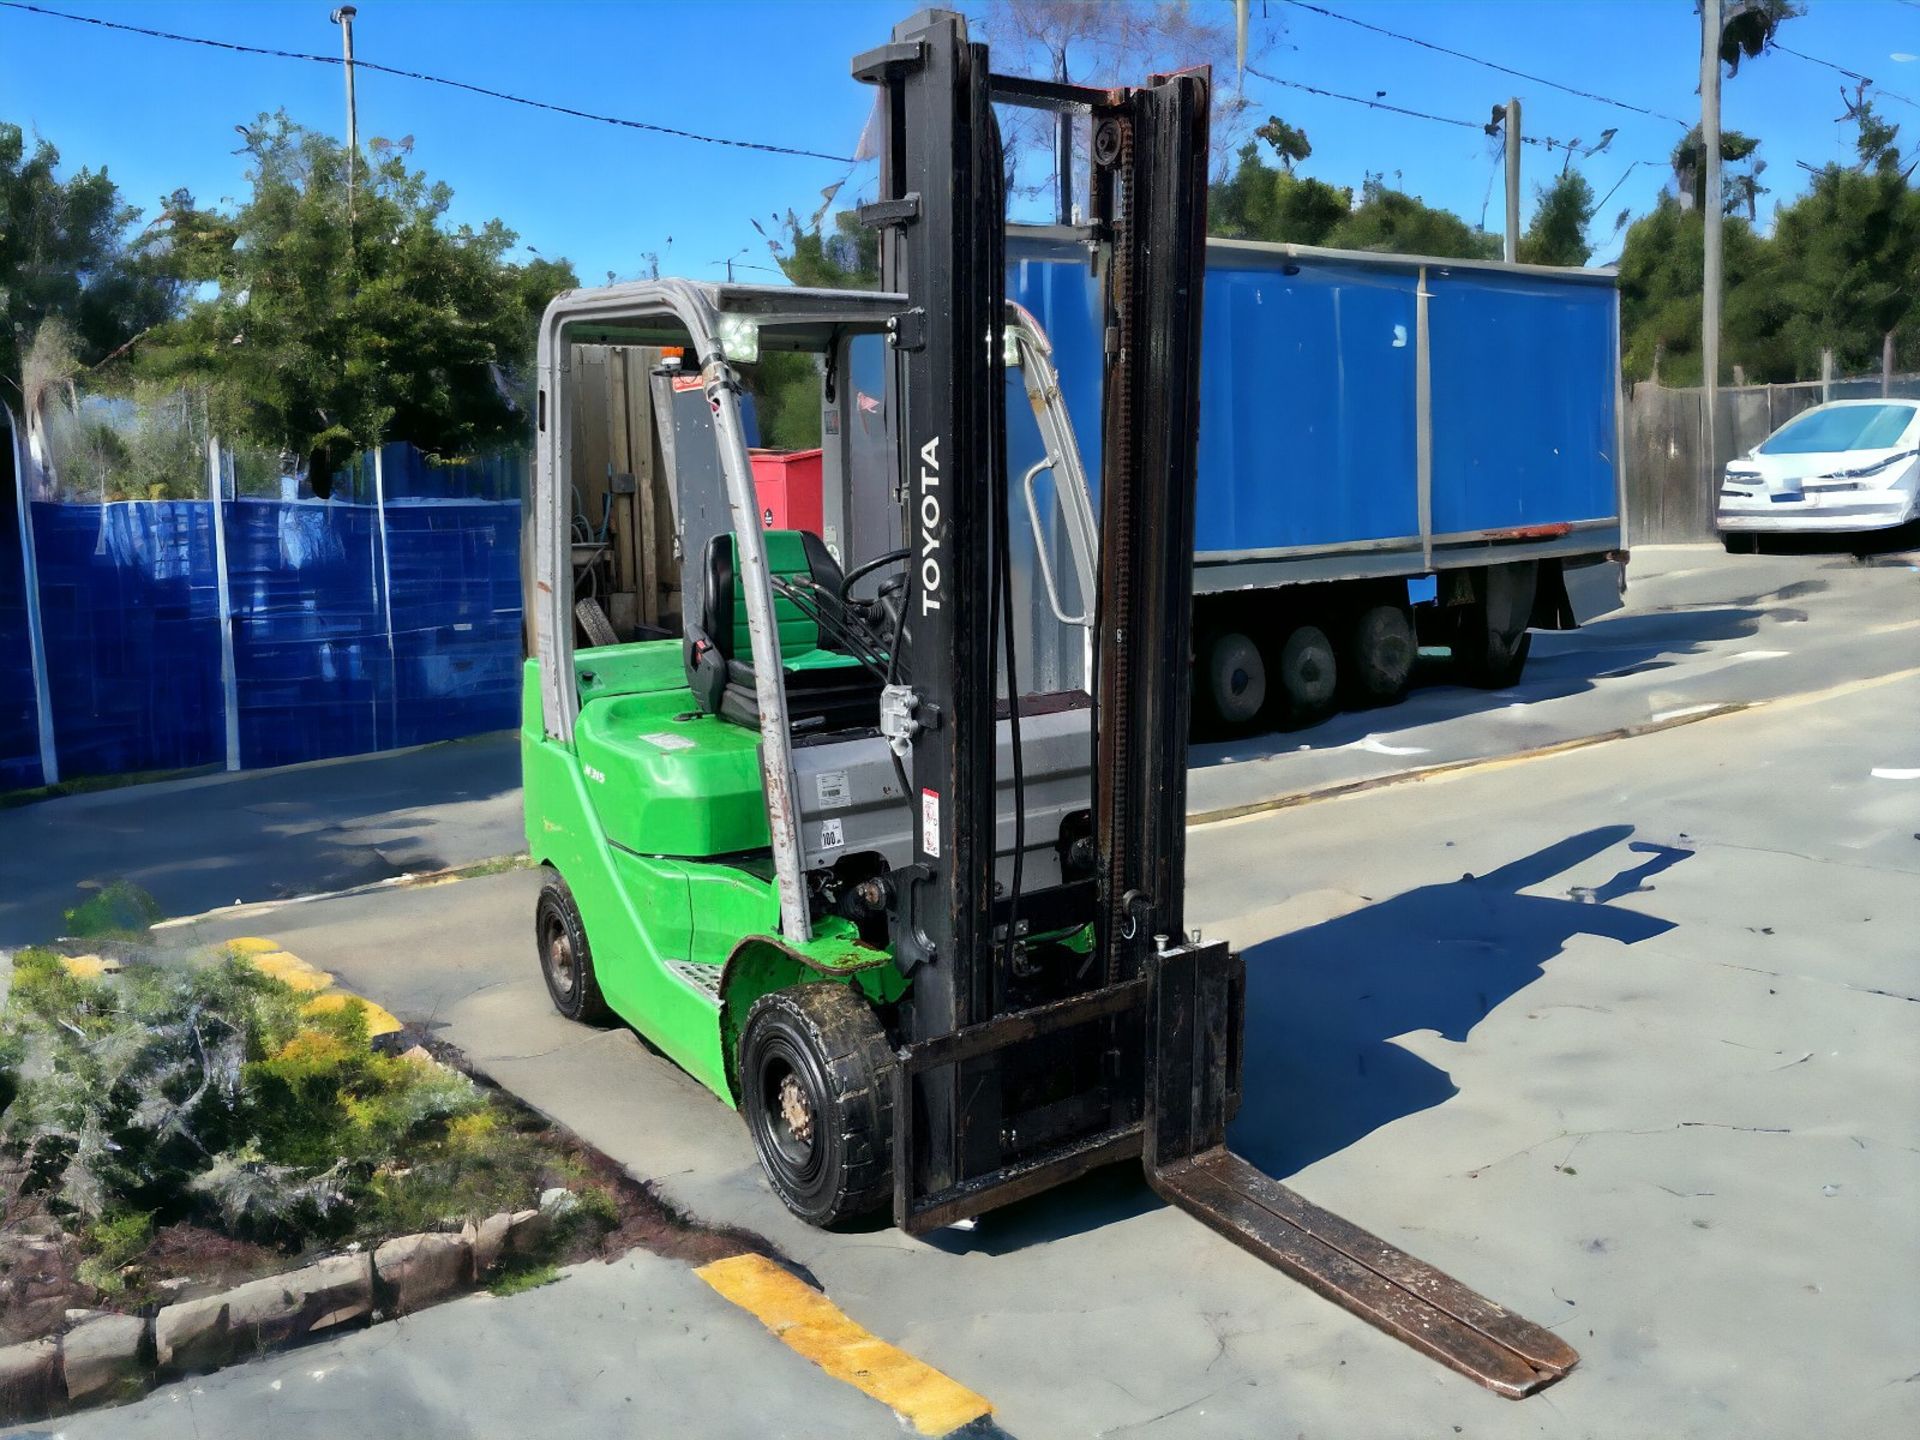 2017 CESAB M315D DIESEL FORKLIFT - RELIABLE PERFORMANCE, EXCEPTIONAL VALUE - Image 6 of 8